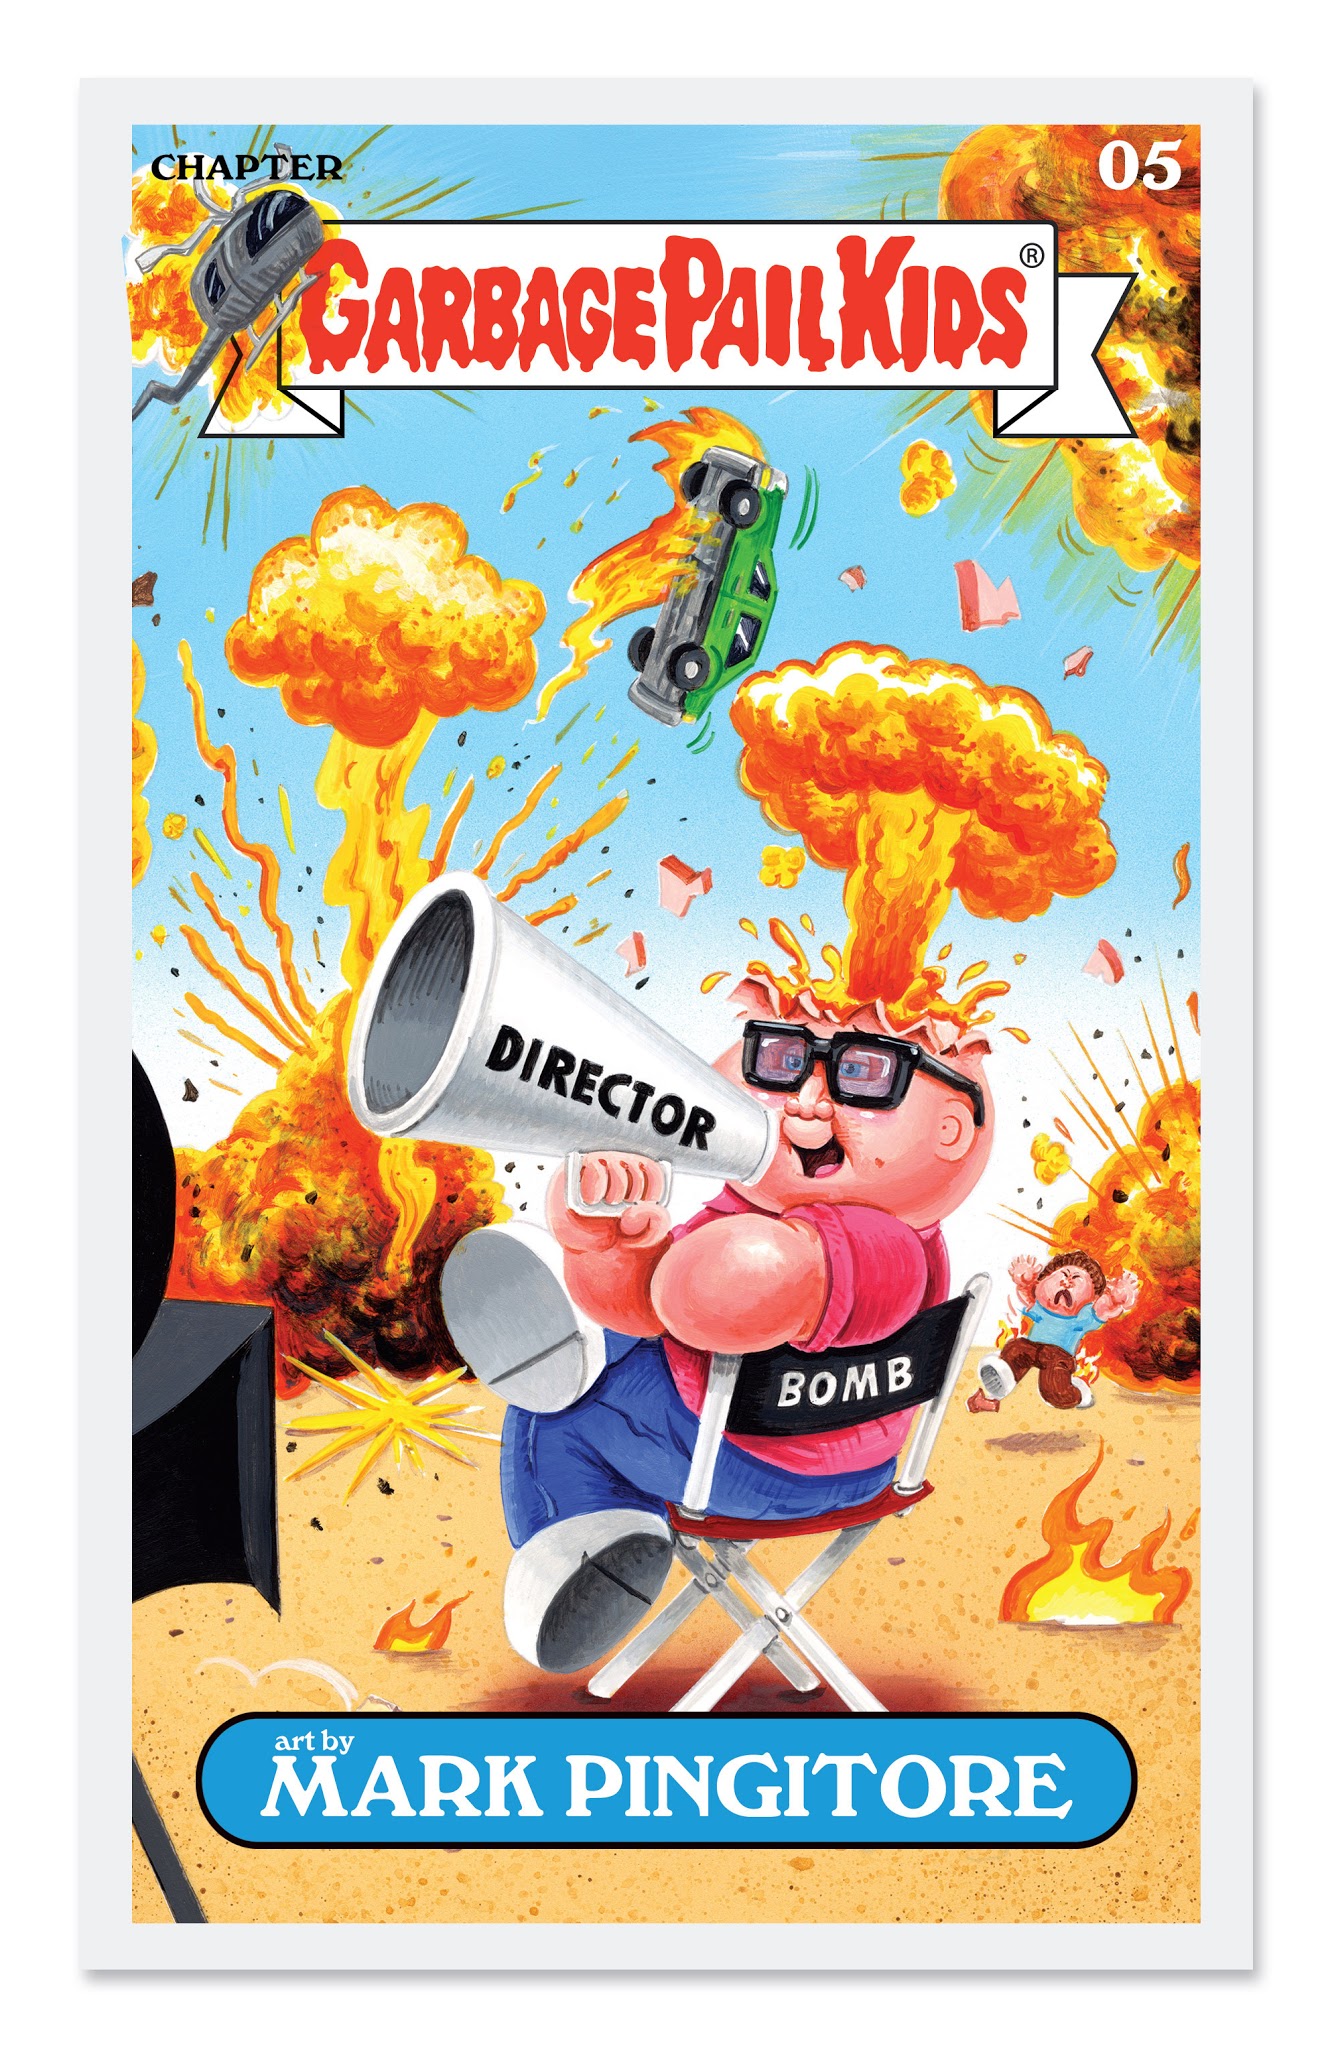 Read online Garbage Pail Kids comic -  Issue # TPB - 94